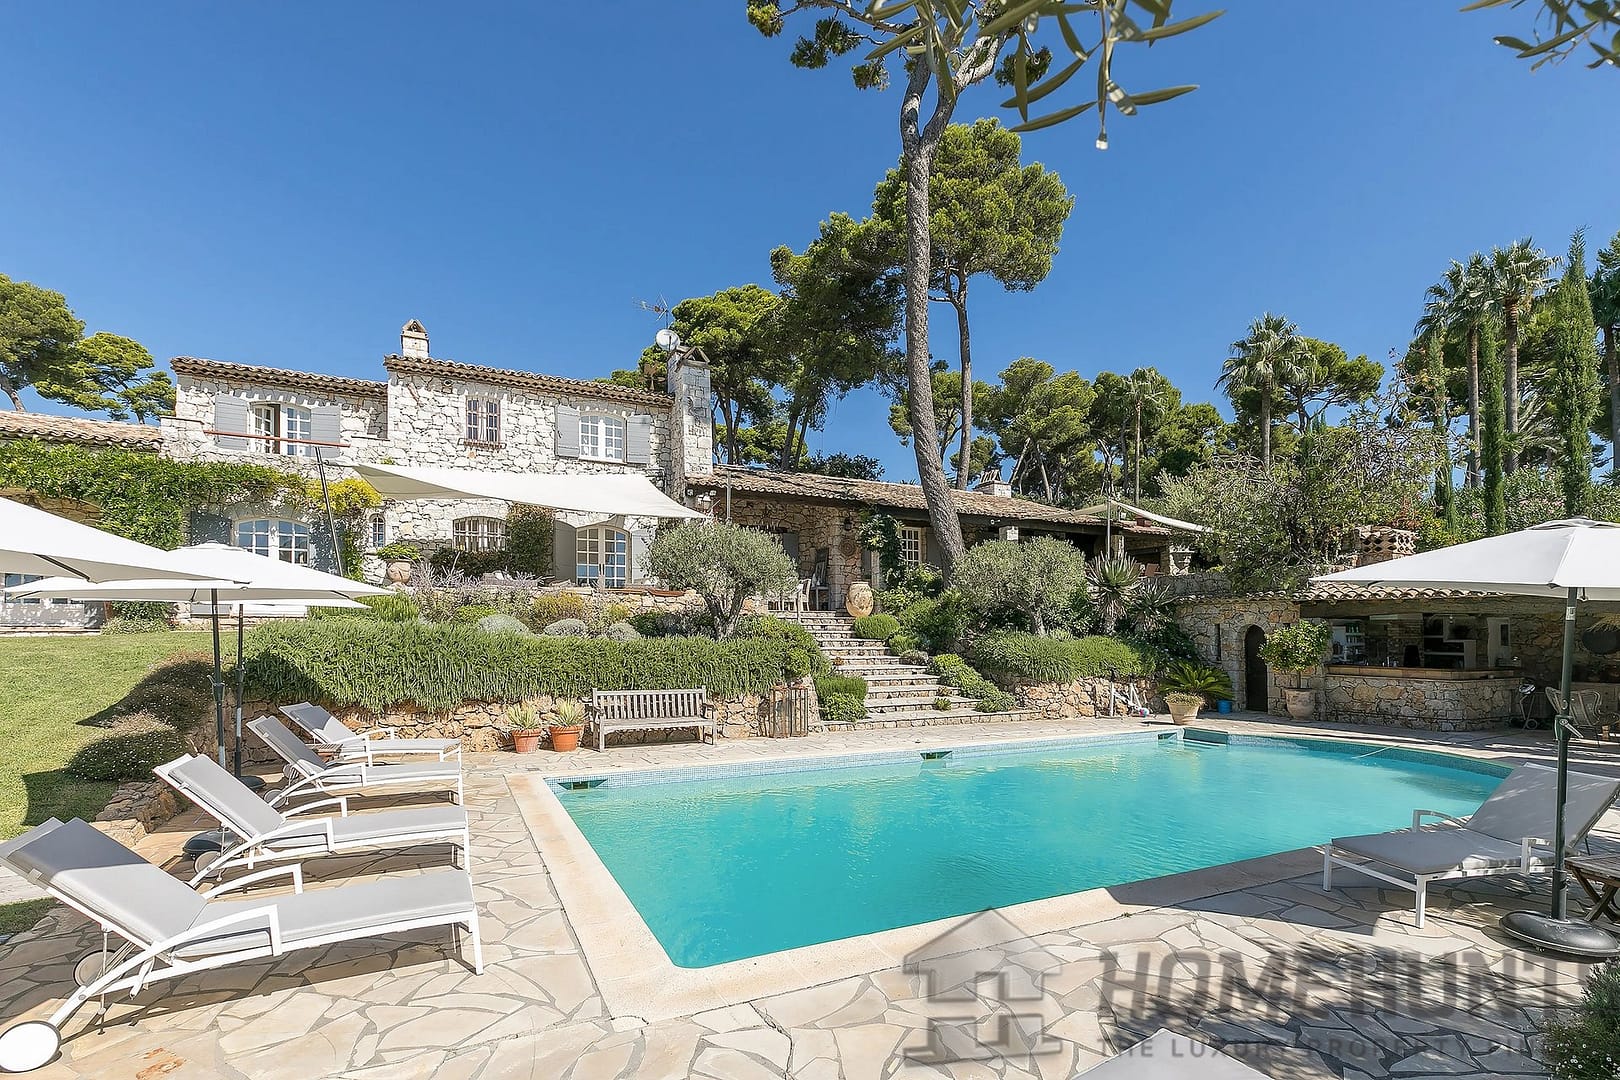 Villa/House For Sale in Antibes 12